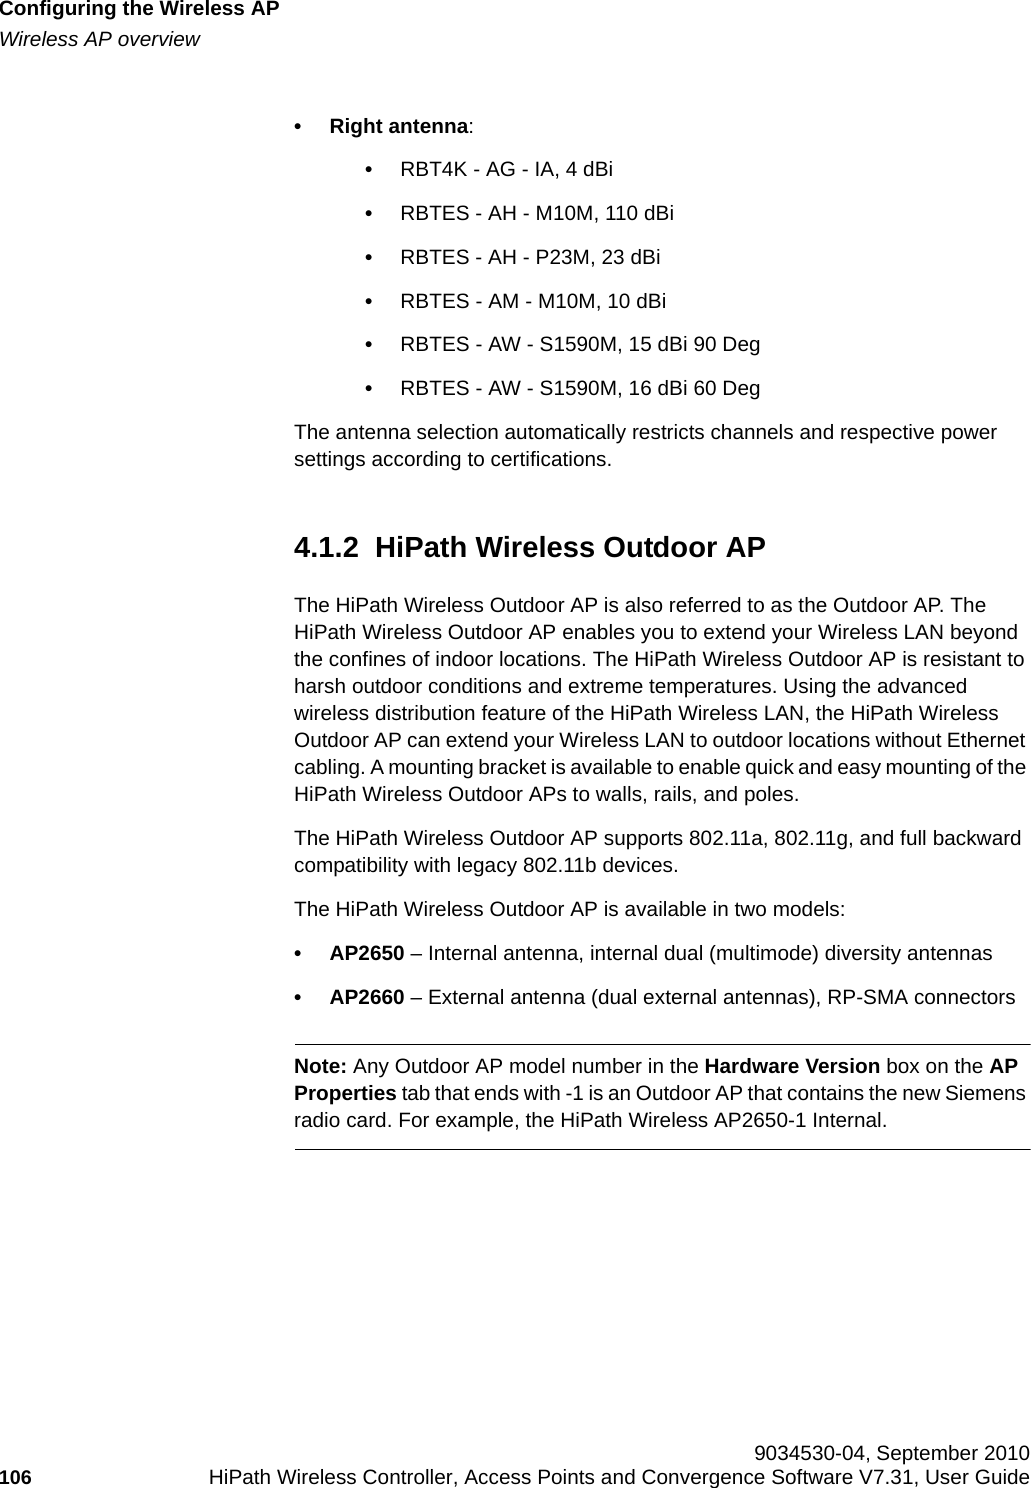 Configuring the Wireless APhwc_apstartup.fmWireless AP overview 9034530-04, September 2010106 HiPath Wireless Controller, Access Points and Convergence Software V7.31, User Guide        • Right antenna:•RBT4K - AG - IA, 4 dBi•RBTES - AH - M10M, 110 dBi•RBTES - AH - P23M, 23 dBi•RBTES - AM - M10M, 10 dBi•RBTES - AW - S1590M, 15 dBi 90 Deg•RBTES - AW - S1590M, 16 dBi 60 DegThe antenna selection automatically restricts channels and respective power settings according to certifications.4.1.2  HiPath Wireless Outdoor APThe HiPath Wireless Outdoor AP is also referred to as the Outdoor AP. The HiPath Wireless Outdoor AP enables you to extend your Wireless LAN beyond the confines of indoor locations. The HiPath Wireless Outdoor AP is resistant to harsh outdoor conditions and extreme temperatures. Using the advanced wireless distribution feature of the HiPath Wireless LAN, the HiPath Wireless Outdoor AP can extend your Wireless LAN to outdoor locations without Ethernet cabling. A mounting bracket is available to enable quick and easy mounting of the HiPath Wireless Outdoor APs to walls, rails, and poles.The HiPath Wireless Outdoor AP supports 802.11a, 802.11g, and full backward compatibility with legacy 802.11b devices. The HiPath Wireless Outdoor AP is available in two models:•AP2650 – Internal antenna, internal dual (multimode) diversity antennas•AP2660 – External antenna (dual external antennas), RP-SMA connectorsNote: Any Outdoor AP model number in the Hardware Version box on the AP Properties tab that ends with -1 is an Outdoor AP that contains the new Siemens radio card. For example, the HiPath Wireless AP2650-1 Internal.